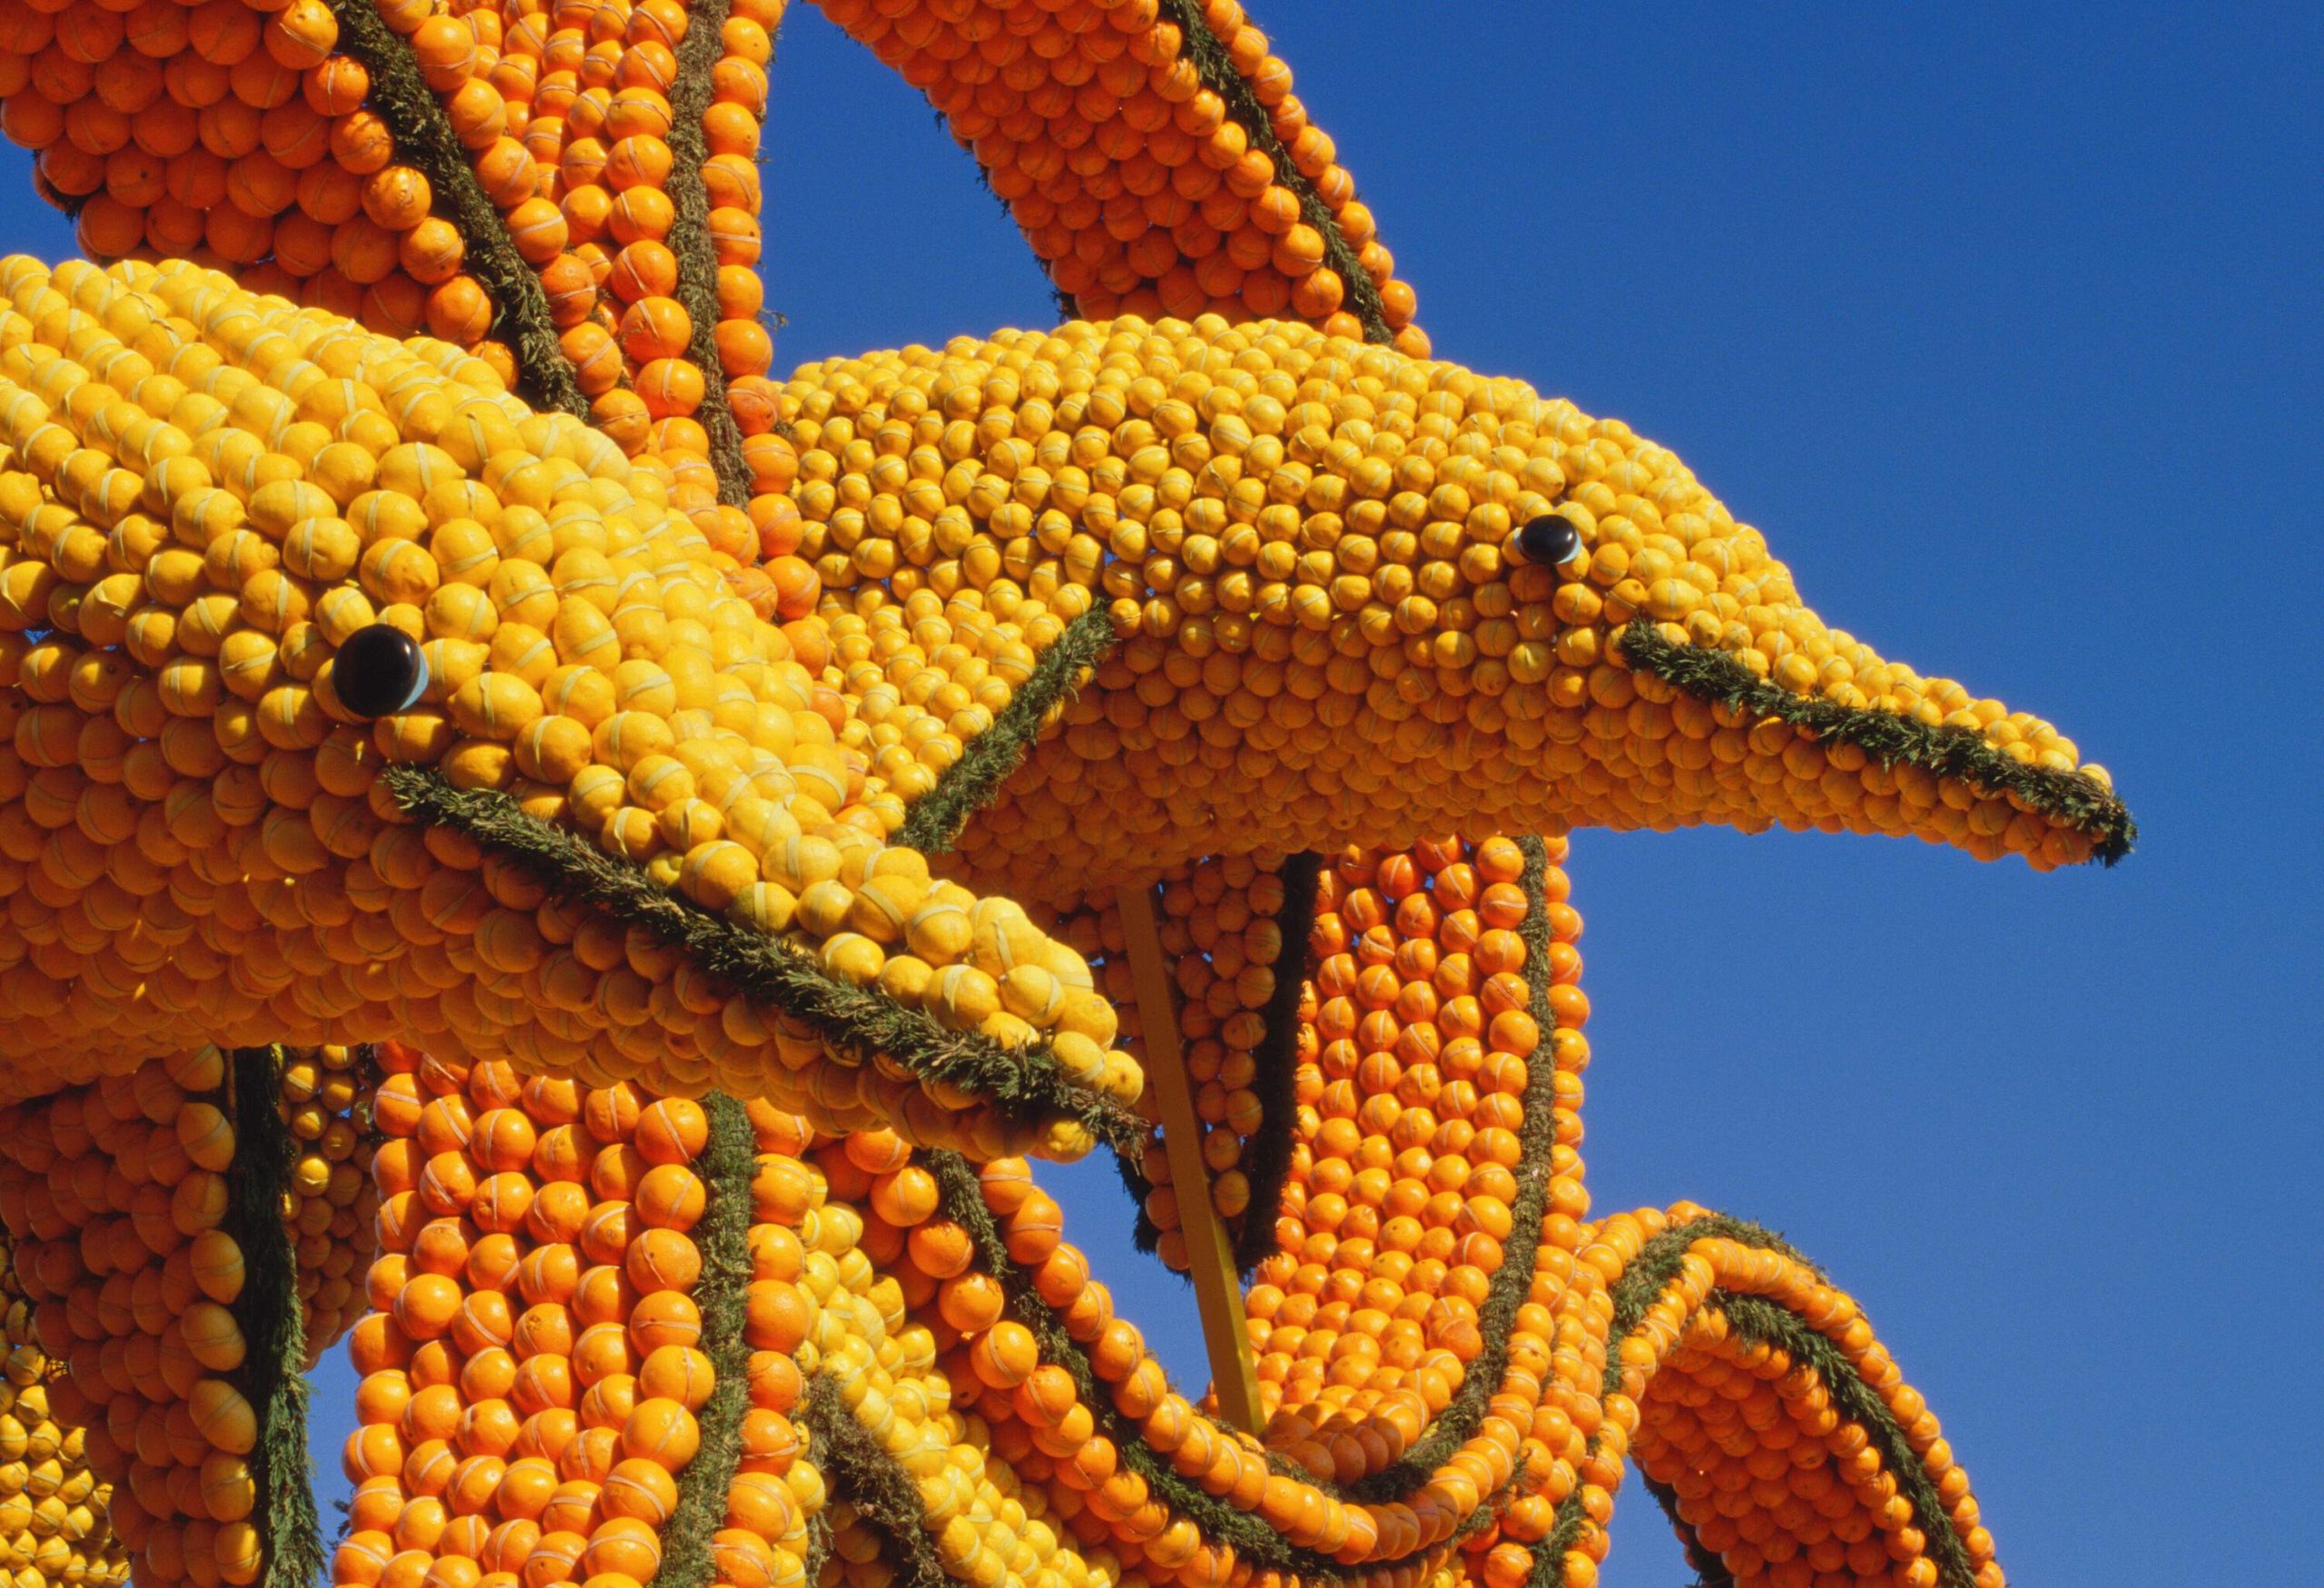 Close up of two dolphine shaped sculptures made out of citrus fruit agains a blue sky